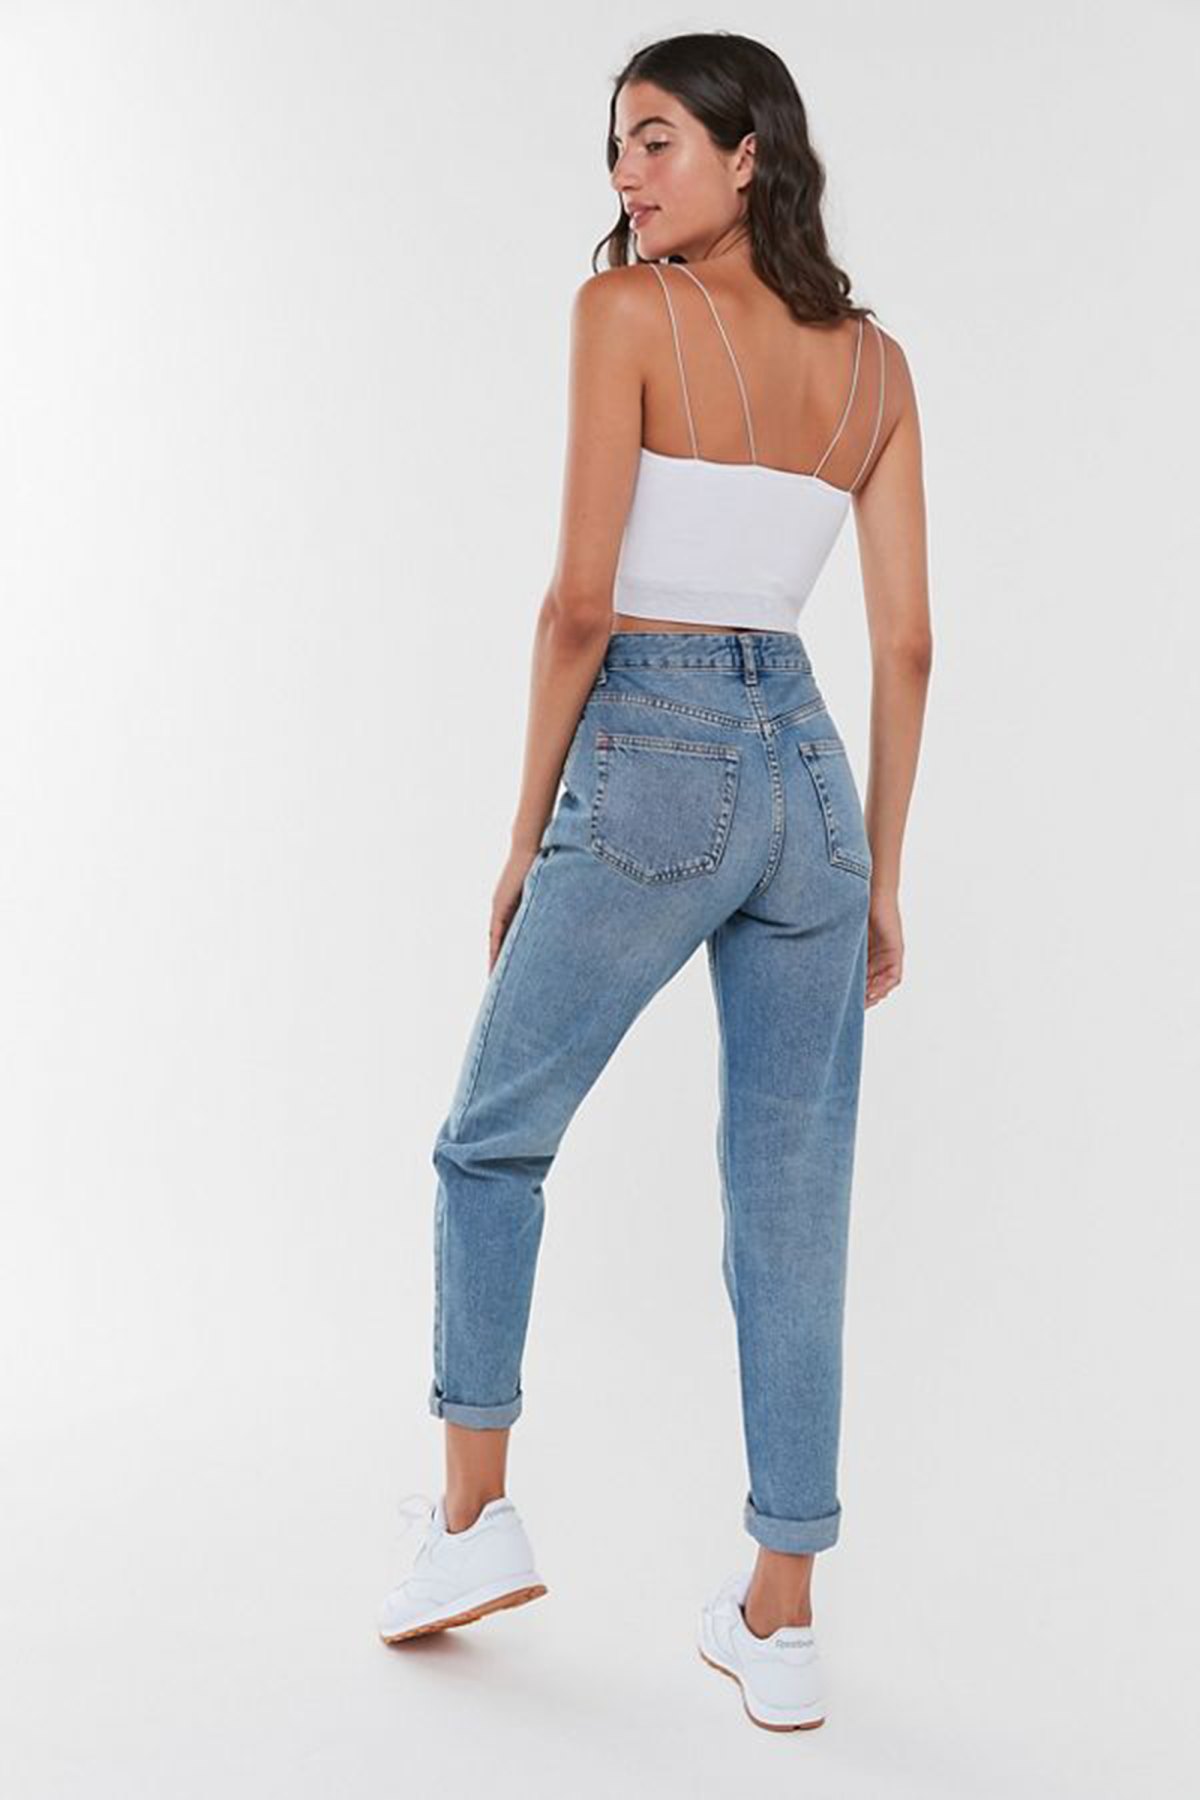 of Our Favorite BDG Jeans on for 30% Off at Urban Outfitters